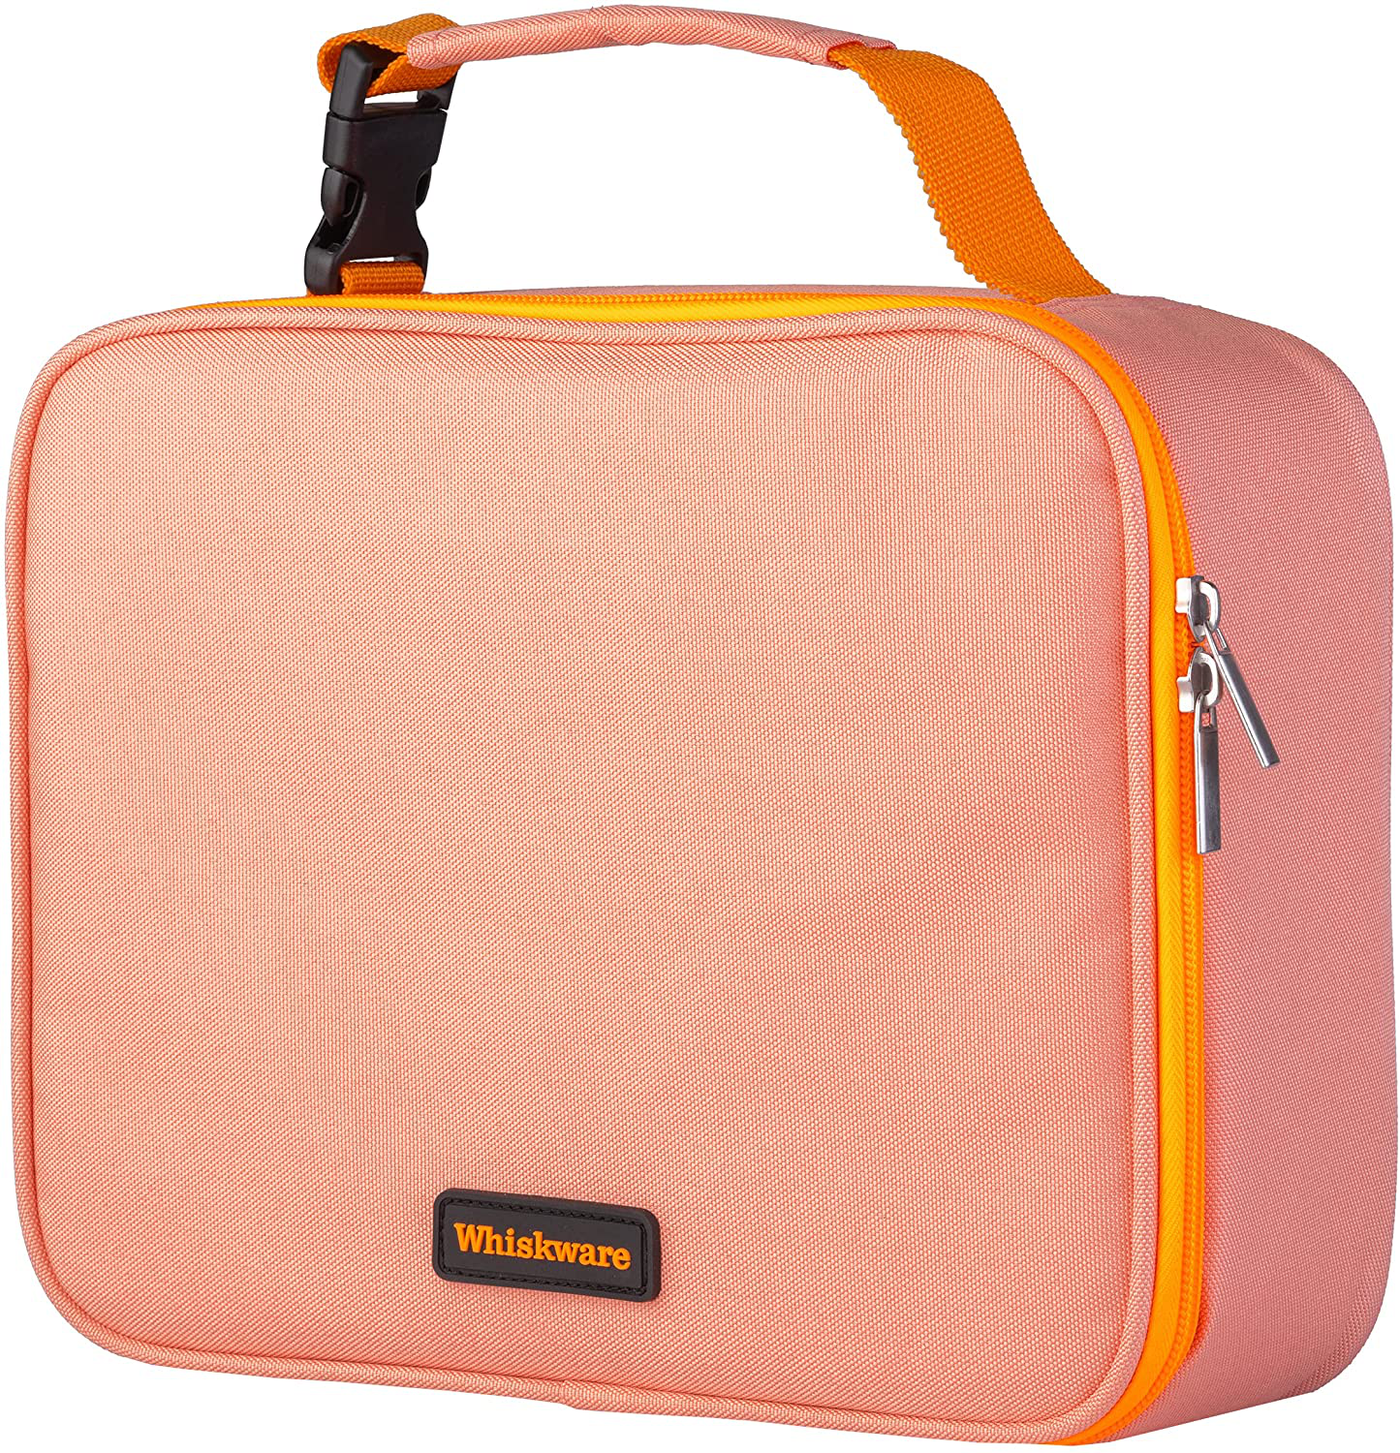 Whiskware Insulated Soft Cooler Lunch Box for School, Work, and Travel, One Size, Coral